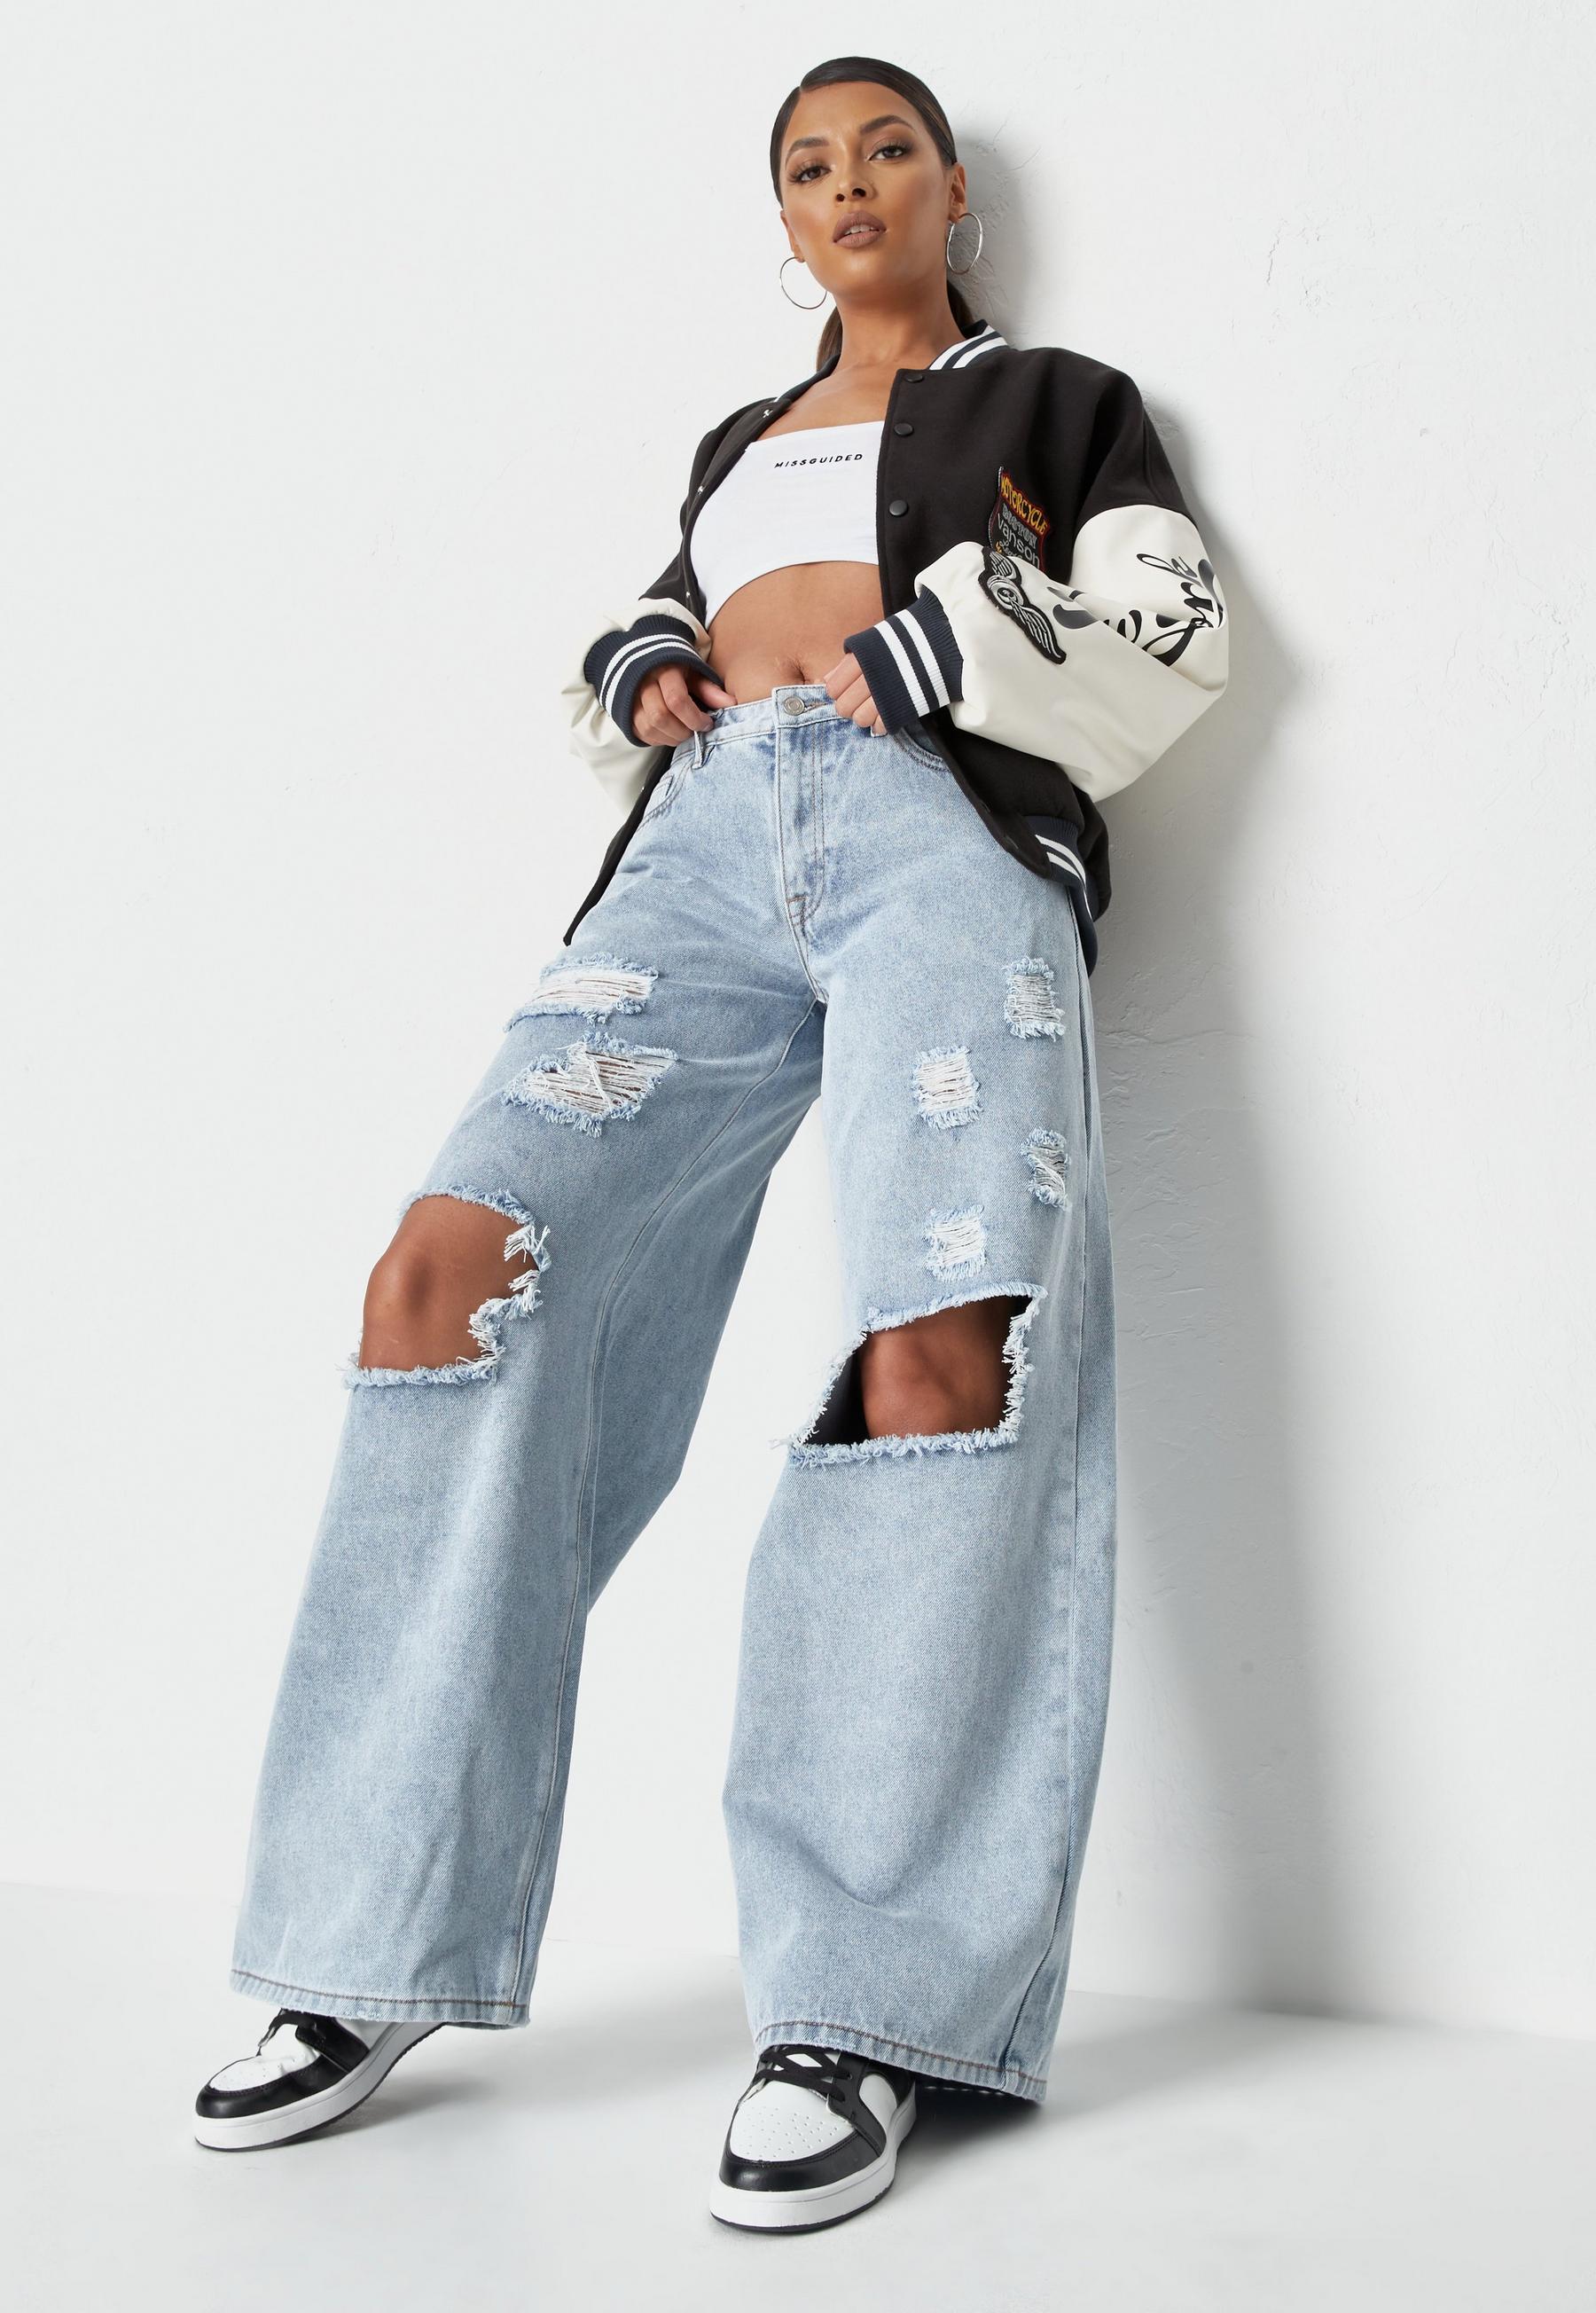 Missguided on Twitter: "*adds to bag* 🛒 Hit the link to shop these styles  + loads more on site RN including the 'recycled light blue low rise baggy boyfriend  jeans' ⚡ https://t.co/TH3K8TfMxG #